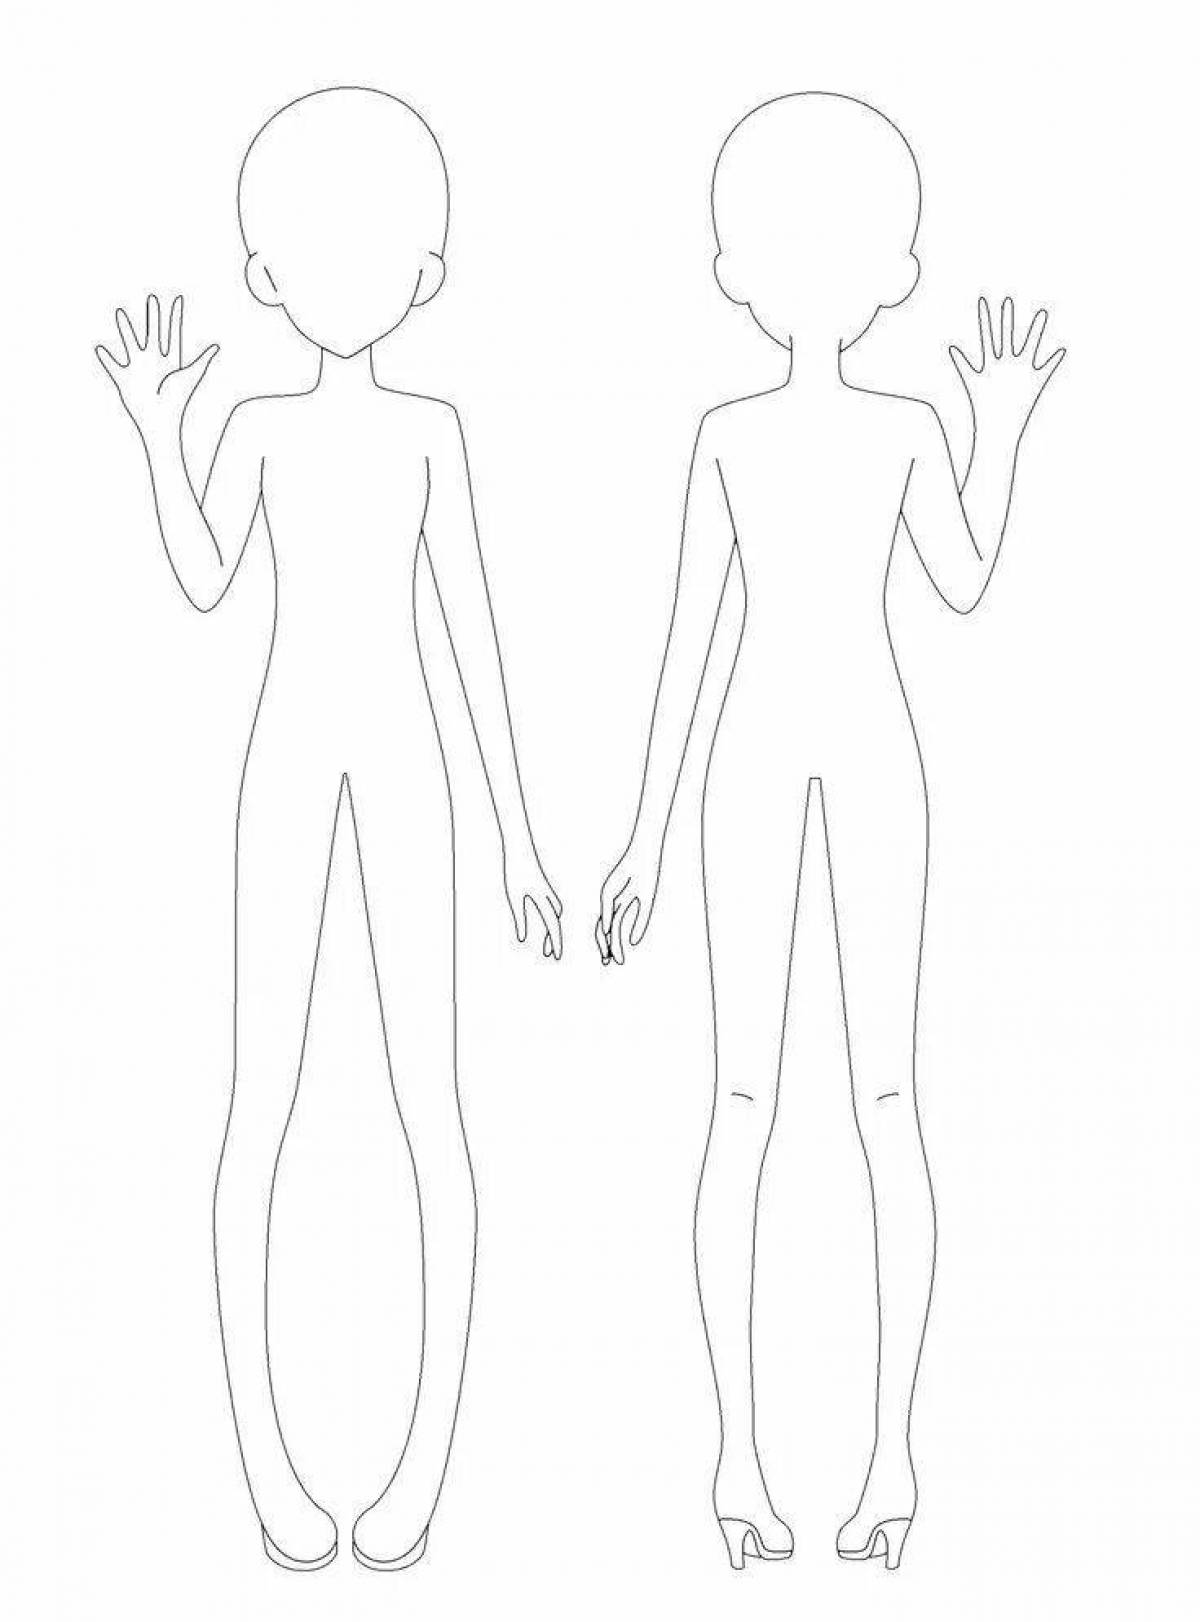 Exquisite anime body coloring page